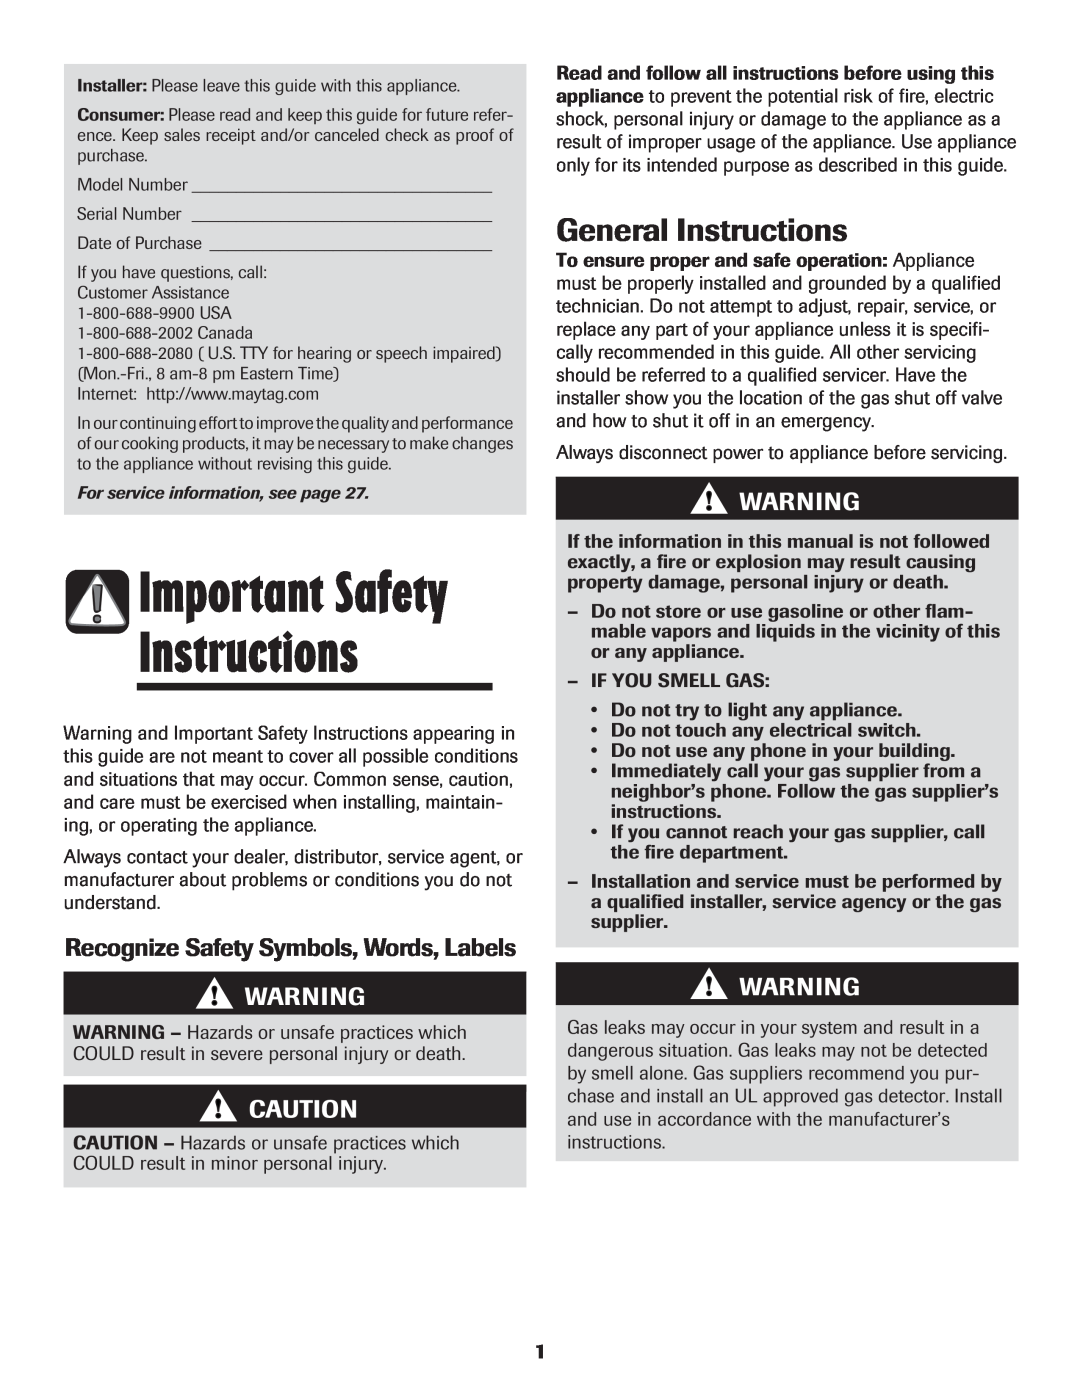 Maytag 850 Important Safety, General Instructions, Recognize Safety Symbols, Words, Labels 